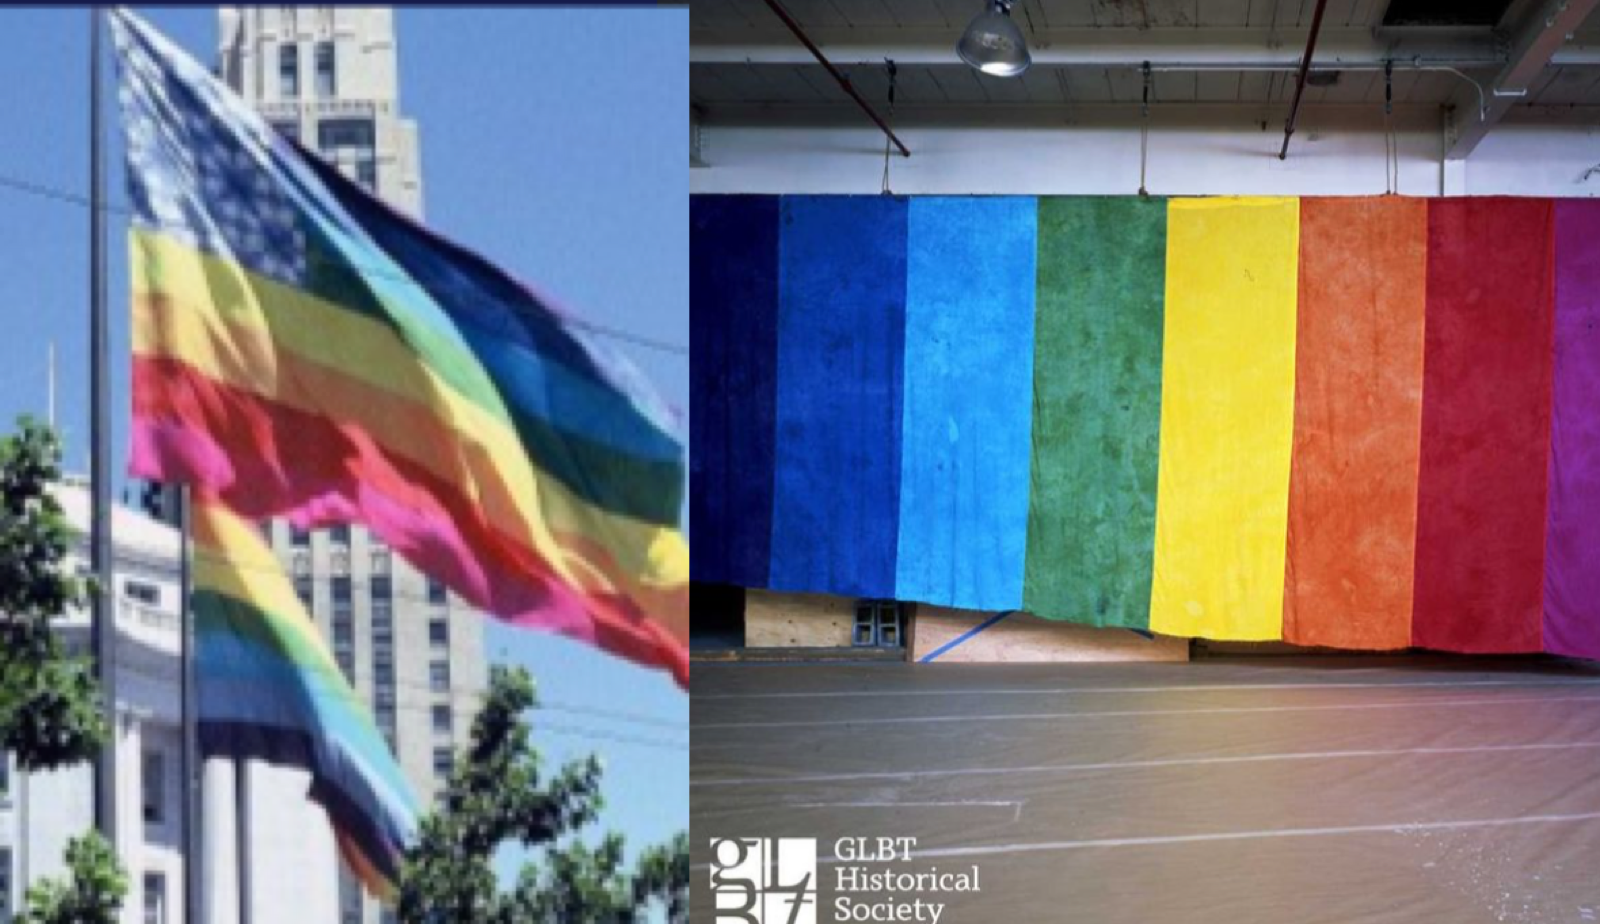 One part of the two original Pride flags created for the 1978 Gay Freedom Day Parade (left) has been recovered. It is now on display at the GLBT History Society Museum in San Francisco (right).